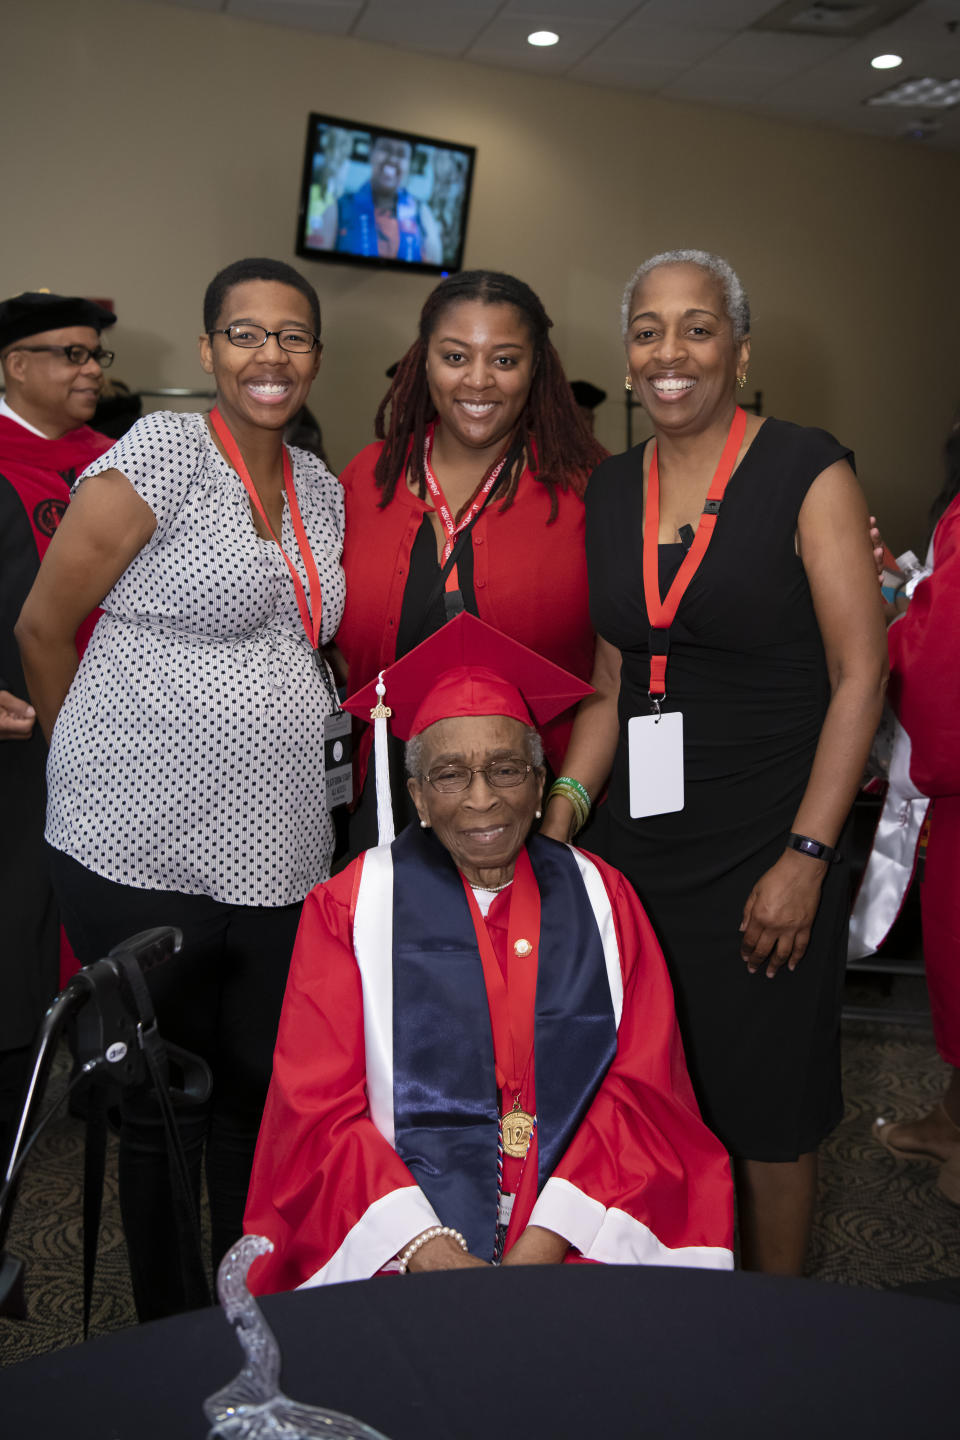 WSSU alumnus and WWII veteran Elizabeth Barker Johnson poses eith her daughter Cynthia Scott (right), and her two granddaughters, Shandra Bryant (left) and Tiffany Scott (center). (Credit: Winston-Salem State University)